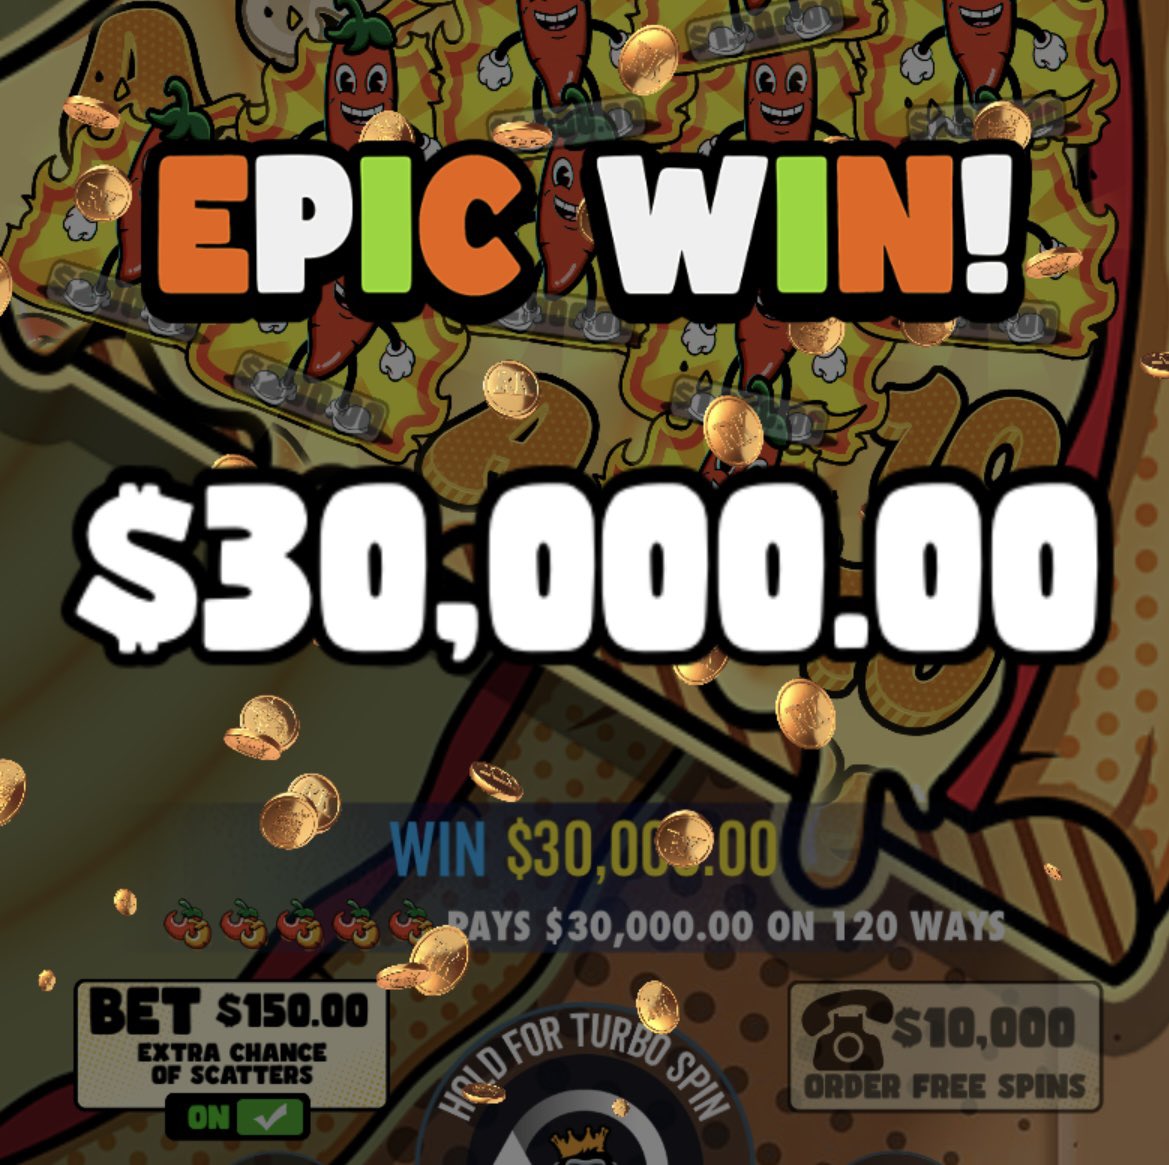 WOW 🤩 ‘Mjouan’ just turned a $150 spin into $30,000 on metawin.com! In celebration we are GIVING AWAY $150 in $ETH free play! Comment your MetaWin username to enter!